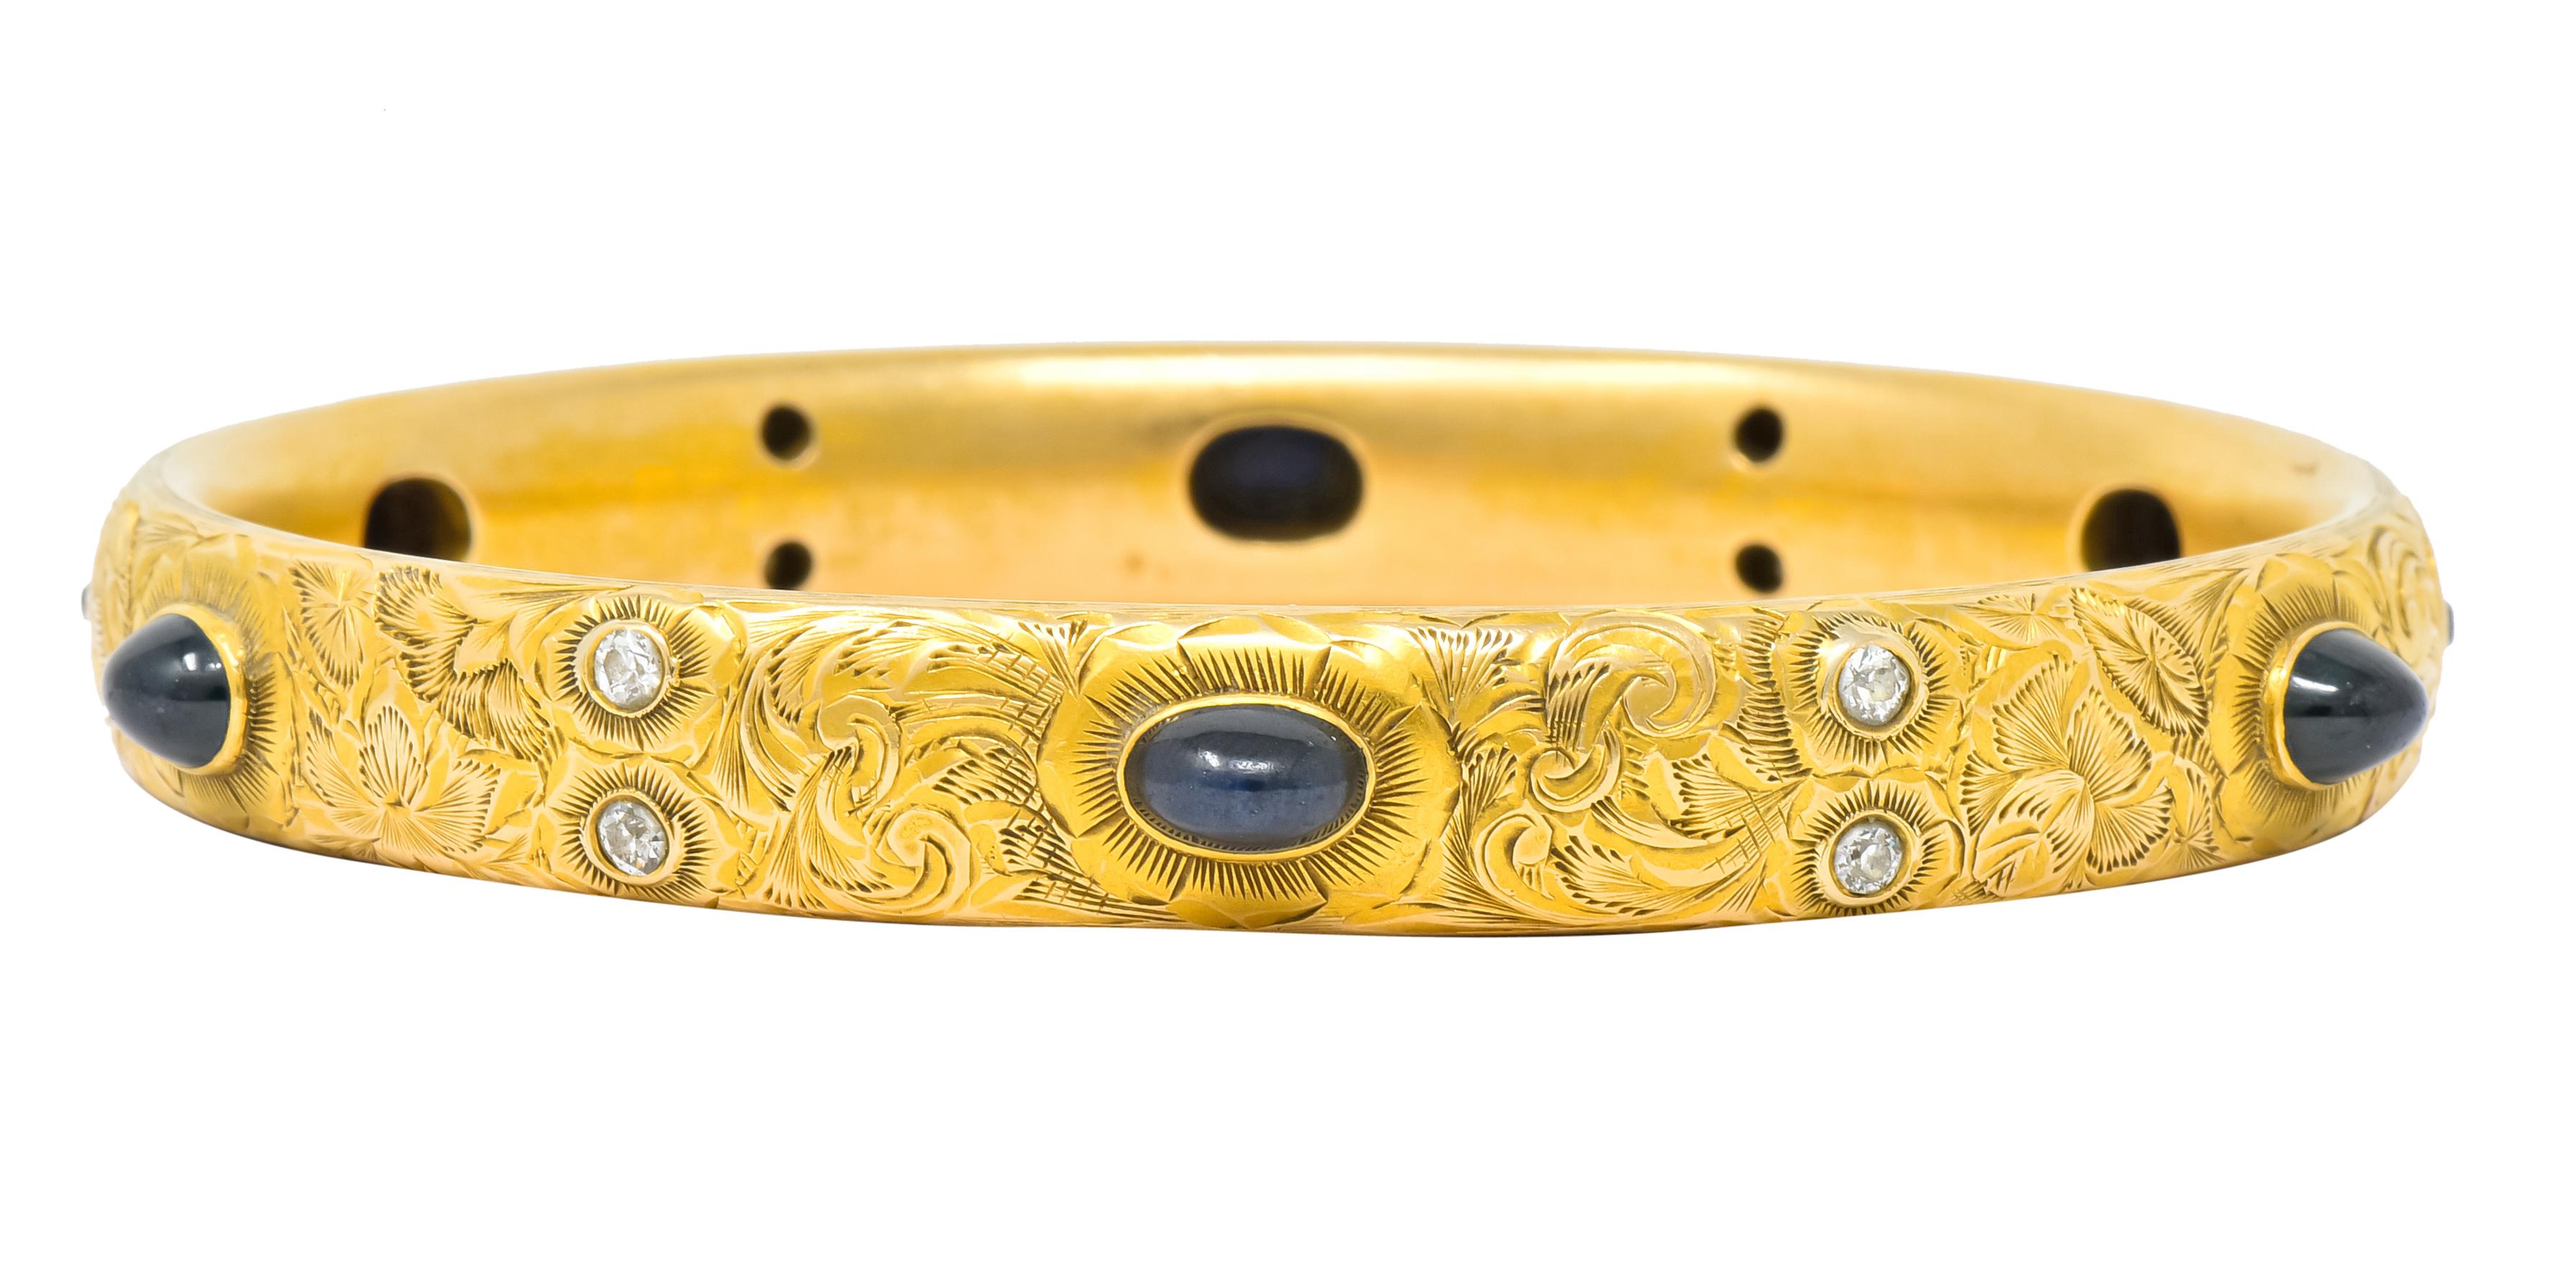 Hollow bangle bracelet fully hand engraved with floral and foliate motif

With sapphire bullet cabochon stations measuring approximately 7.0 mm, dark inky blue/green in color

Accented by bezel set old European cut diamonds weighing approximately